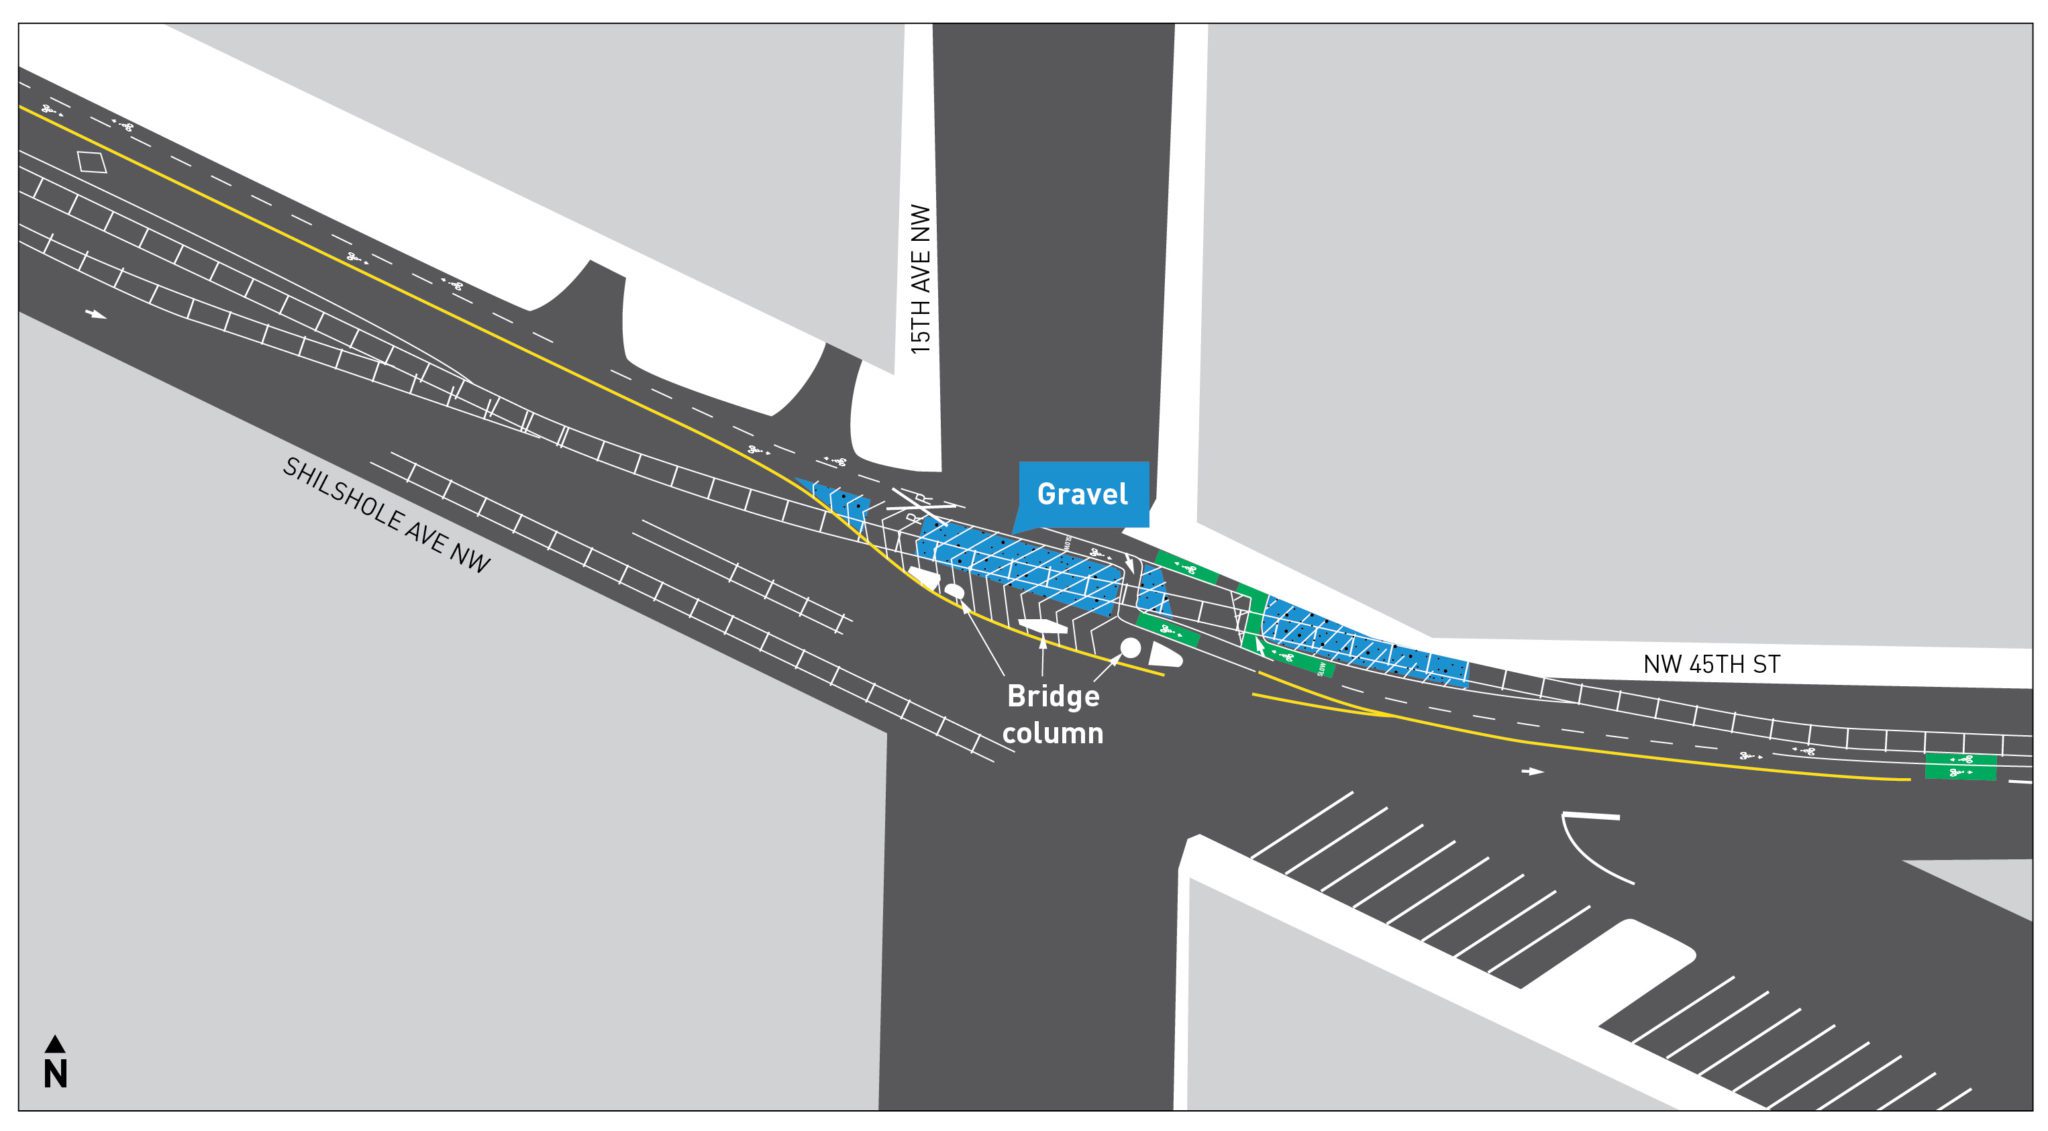 Diagram of planned changes showing areas where pavement will be replaced with gravel. 